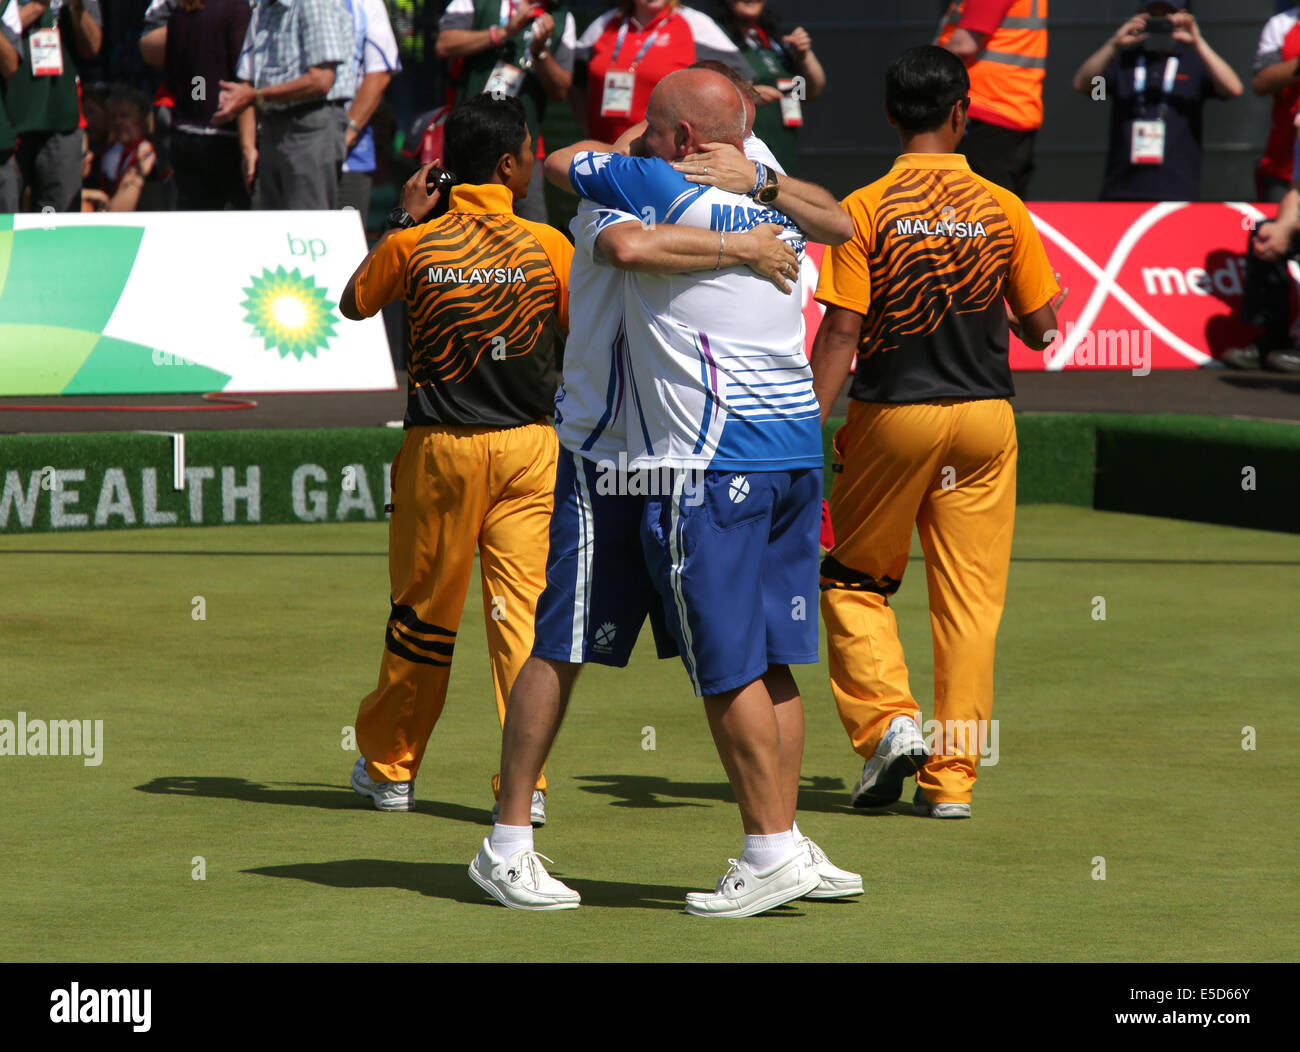 Kelvingrove Lawn Bowls Centre, Glasgow, Scotland, UK, Monday, 28th July, 2014. Scotland's Paul Foster and Alex Marshall celebrate winning Gold in the Men's Lawn Bowls Pairs Final defeating Malaysia's Muhammad Hizlee Abdul Rais and Fairul Izwan Abd Muin at the Glasgow 2014 Commonwealth Games Stock Photo